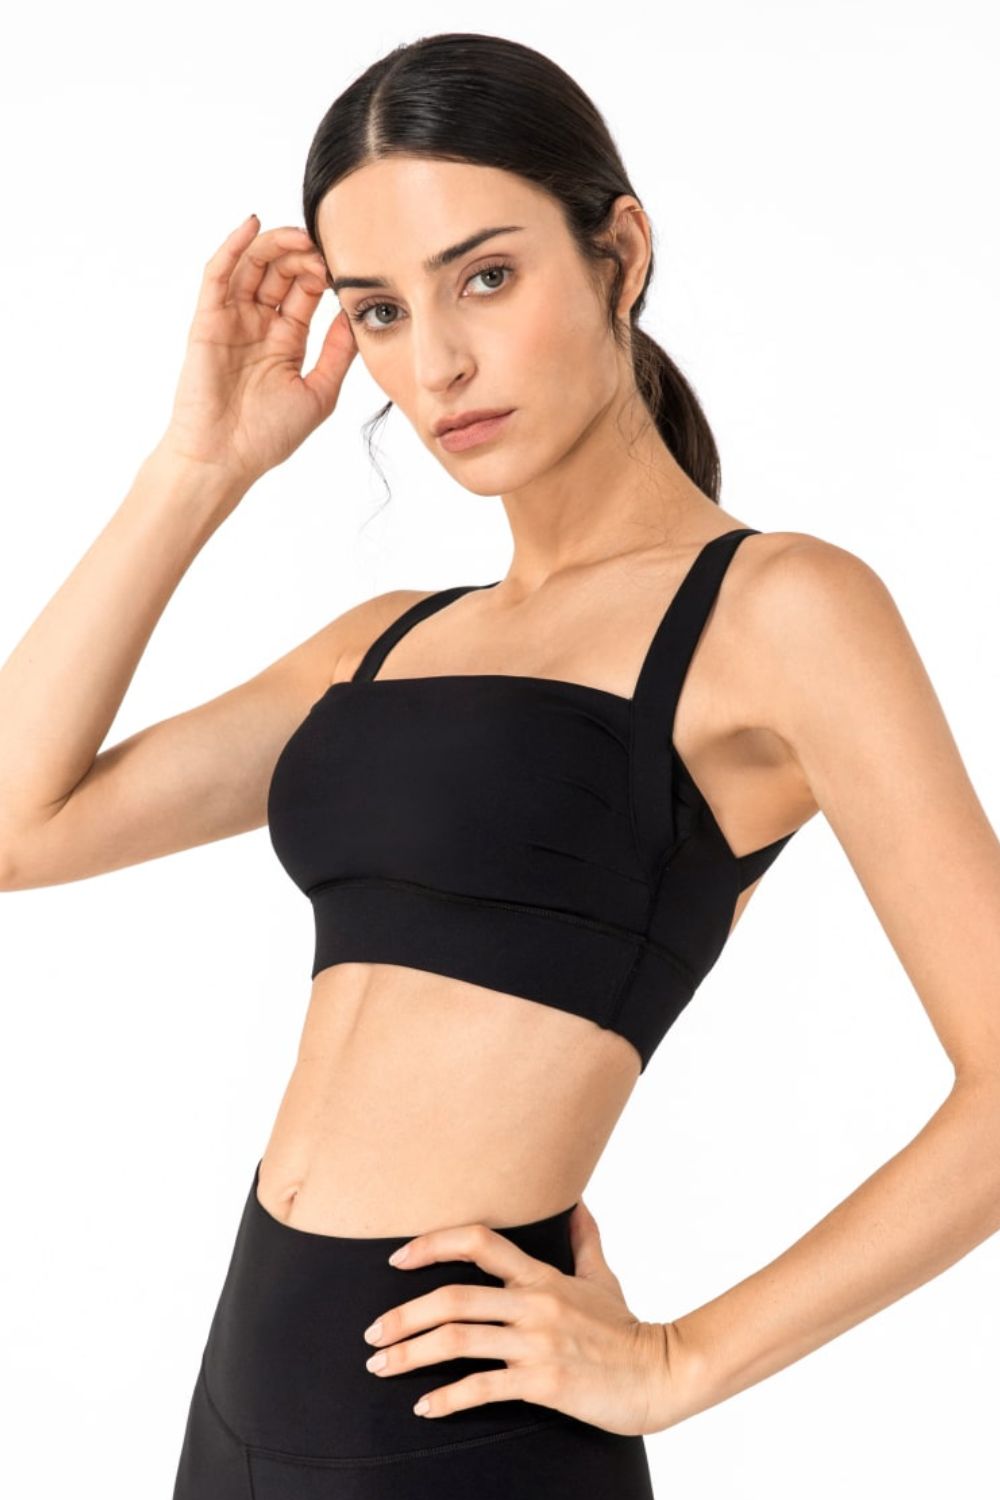 Backless Crop Top and Yoga Top Women's Open Back Pleated Detail Sports Bra KESLEY